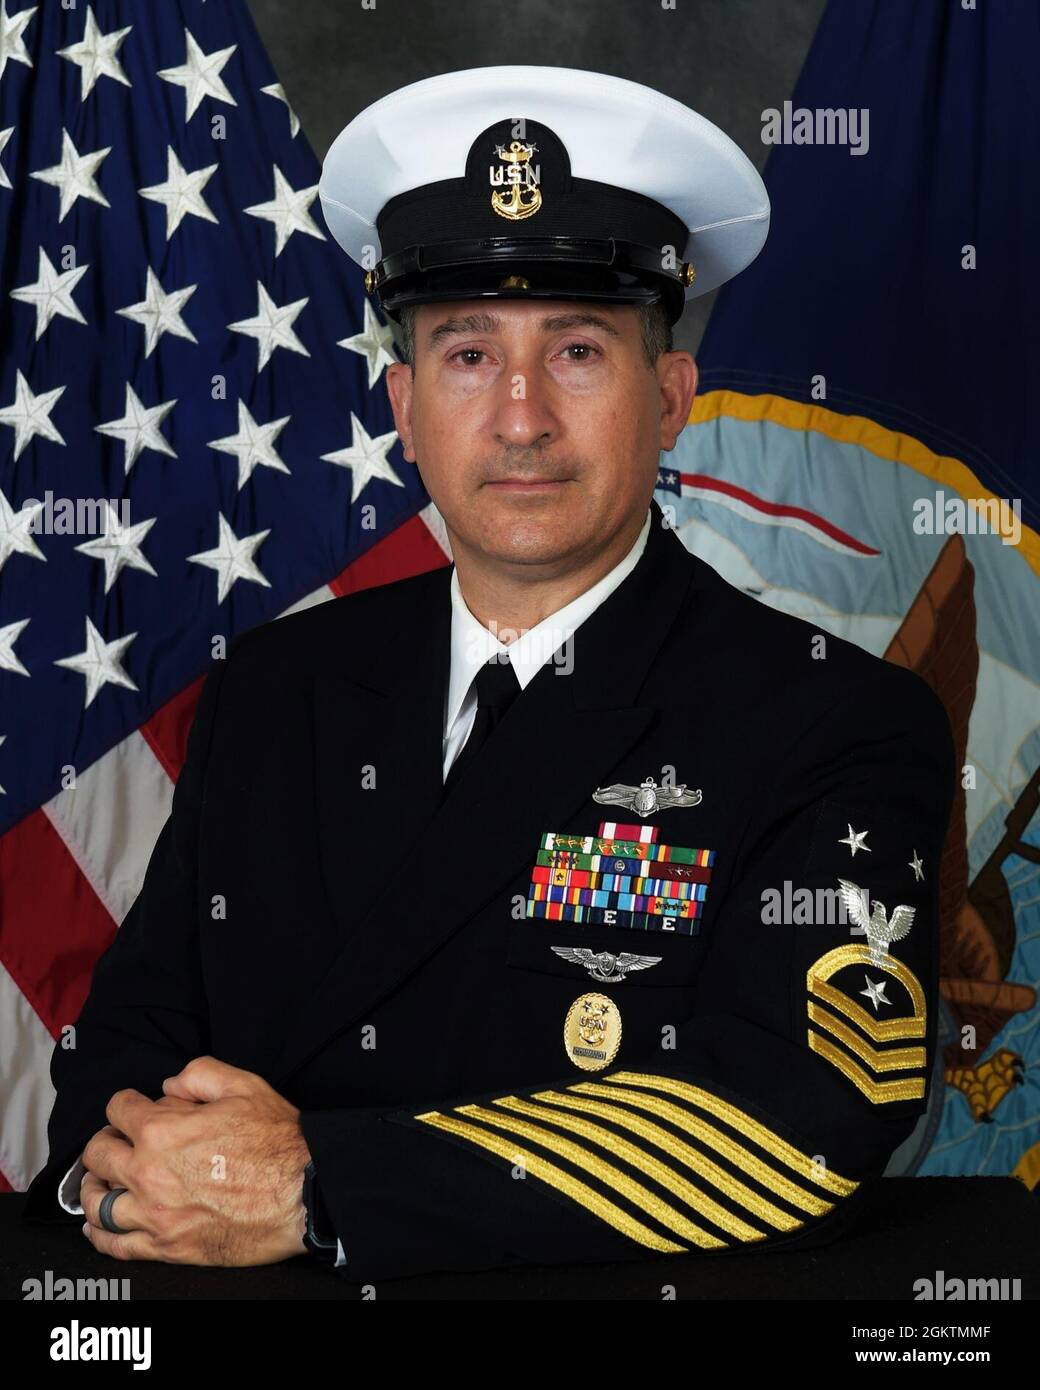 210630-N-XX139-0006 PENSACOLA, Fla. (June 30, 2021) Official portrait of the Center for Information Warfare Training (CIWT) Command Master Chief Jason Thibodeaux. With four schoolhouse commands, a detachment, and training sites throughout the United States and Japan, CIWT trains approximately 26,000 students every year, delivering trained information warfare professionals to the Navy and joint services. CIWT also offers more than 200 courses for cryptologic technicians, intelligence specialists, information systems technicians, electronics technicians, and officers in the information warfare c Stock Photo